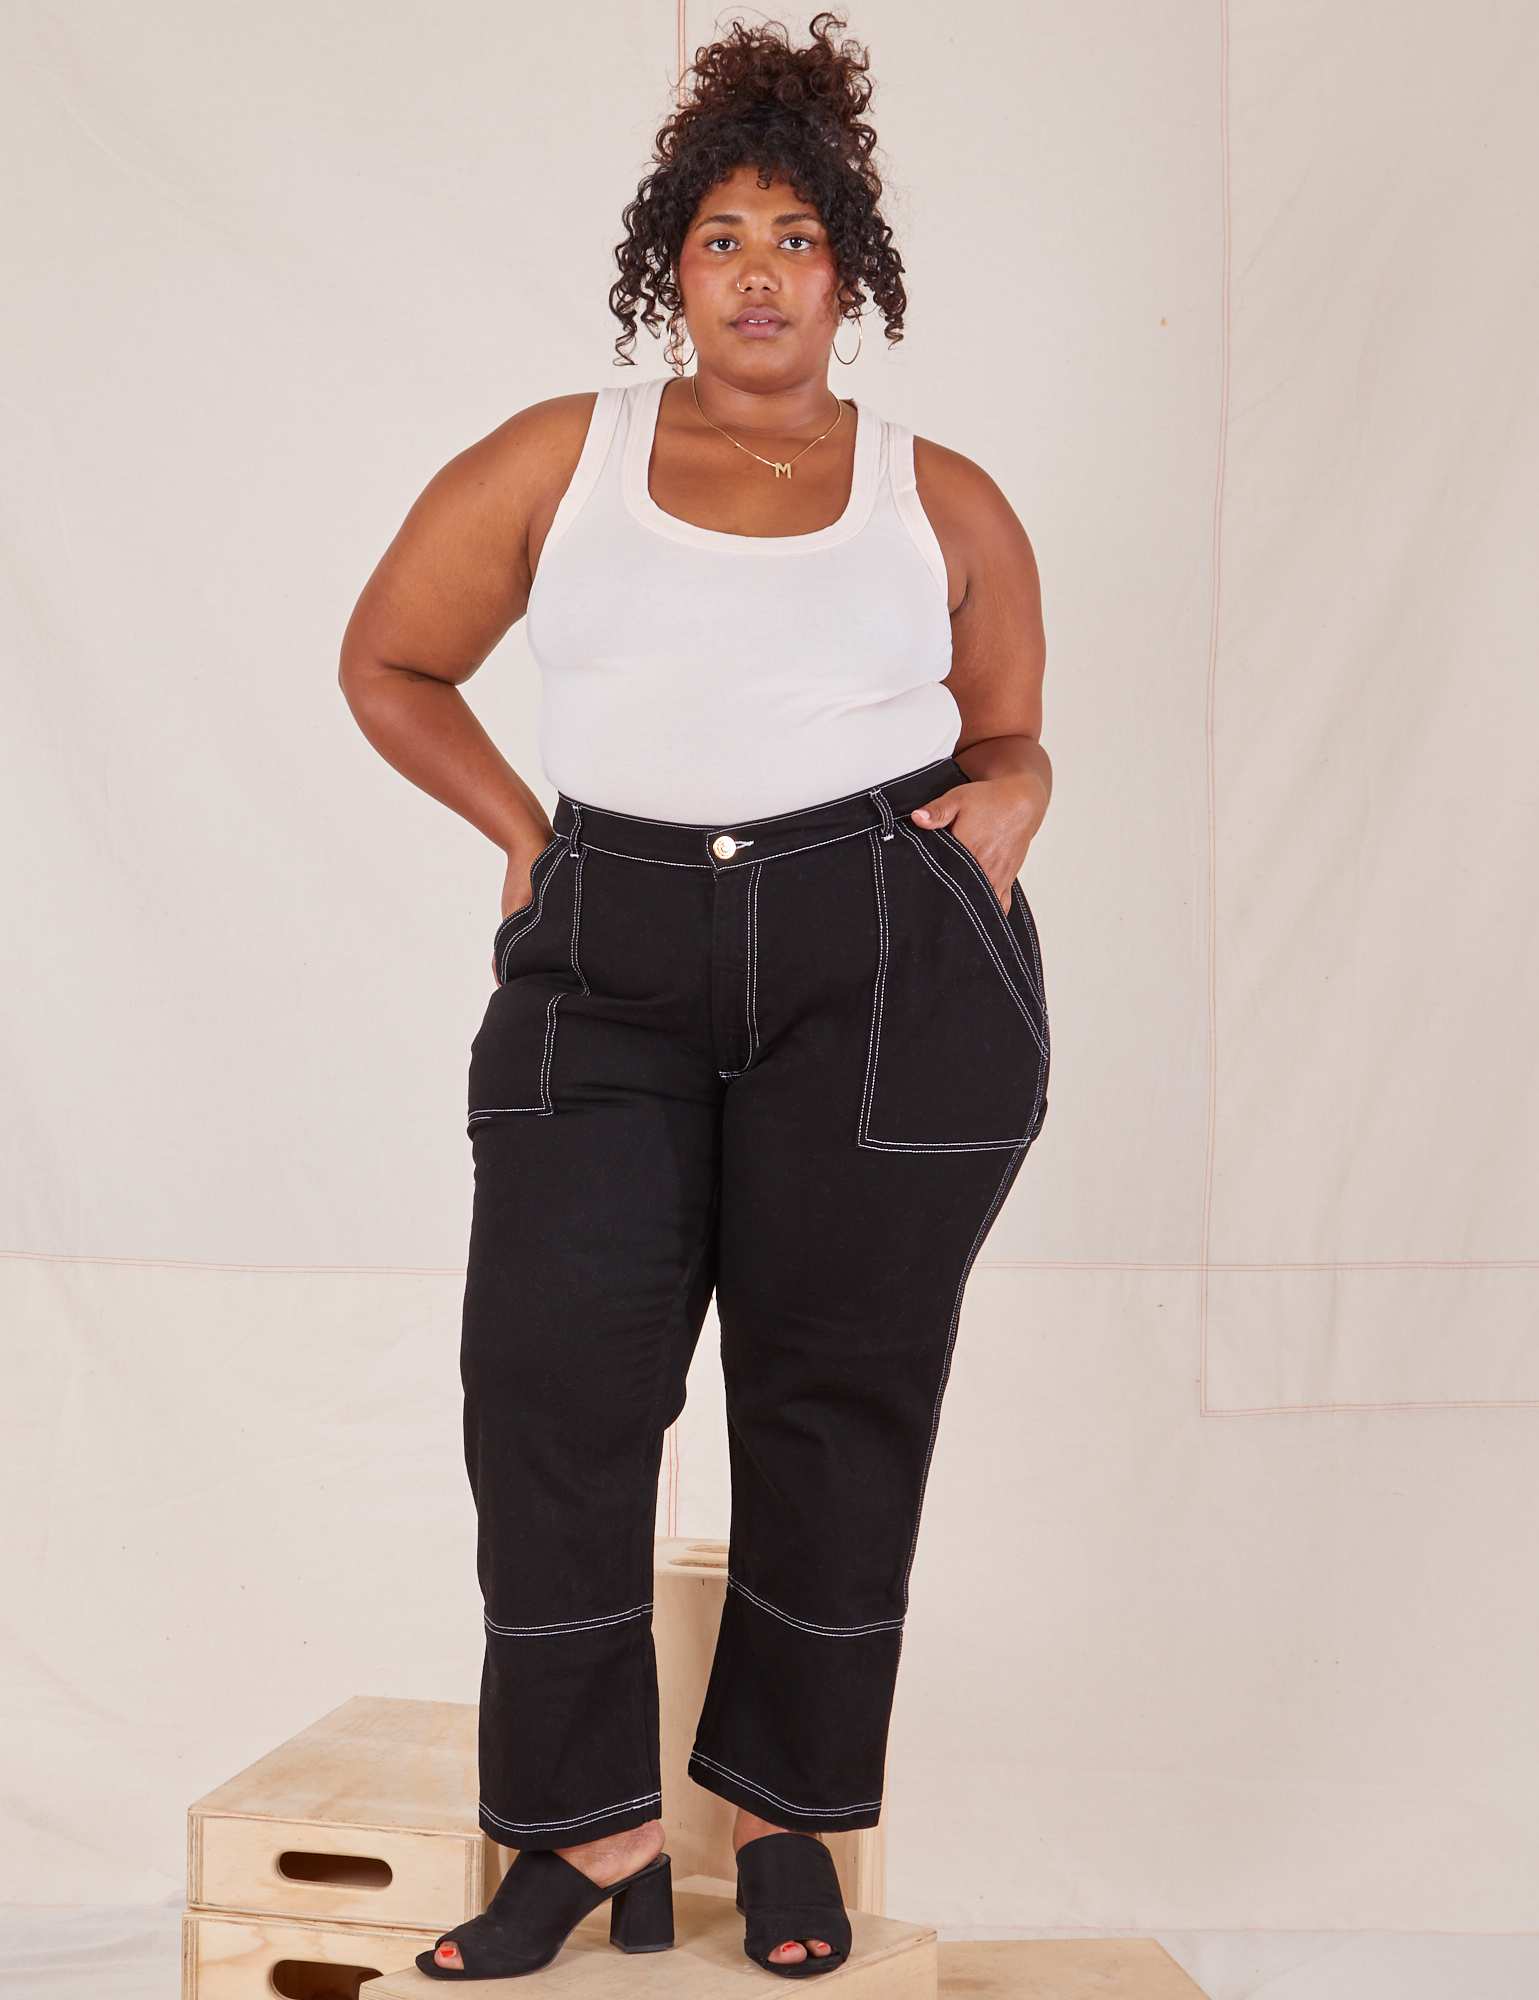 Morgan is 5&#39;5&quot; and wearing 1XL Carpenter Jeans in Black paired with Tank Top in vintage tee off-white